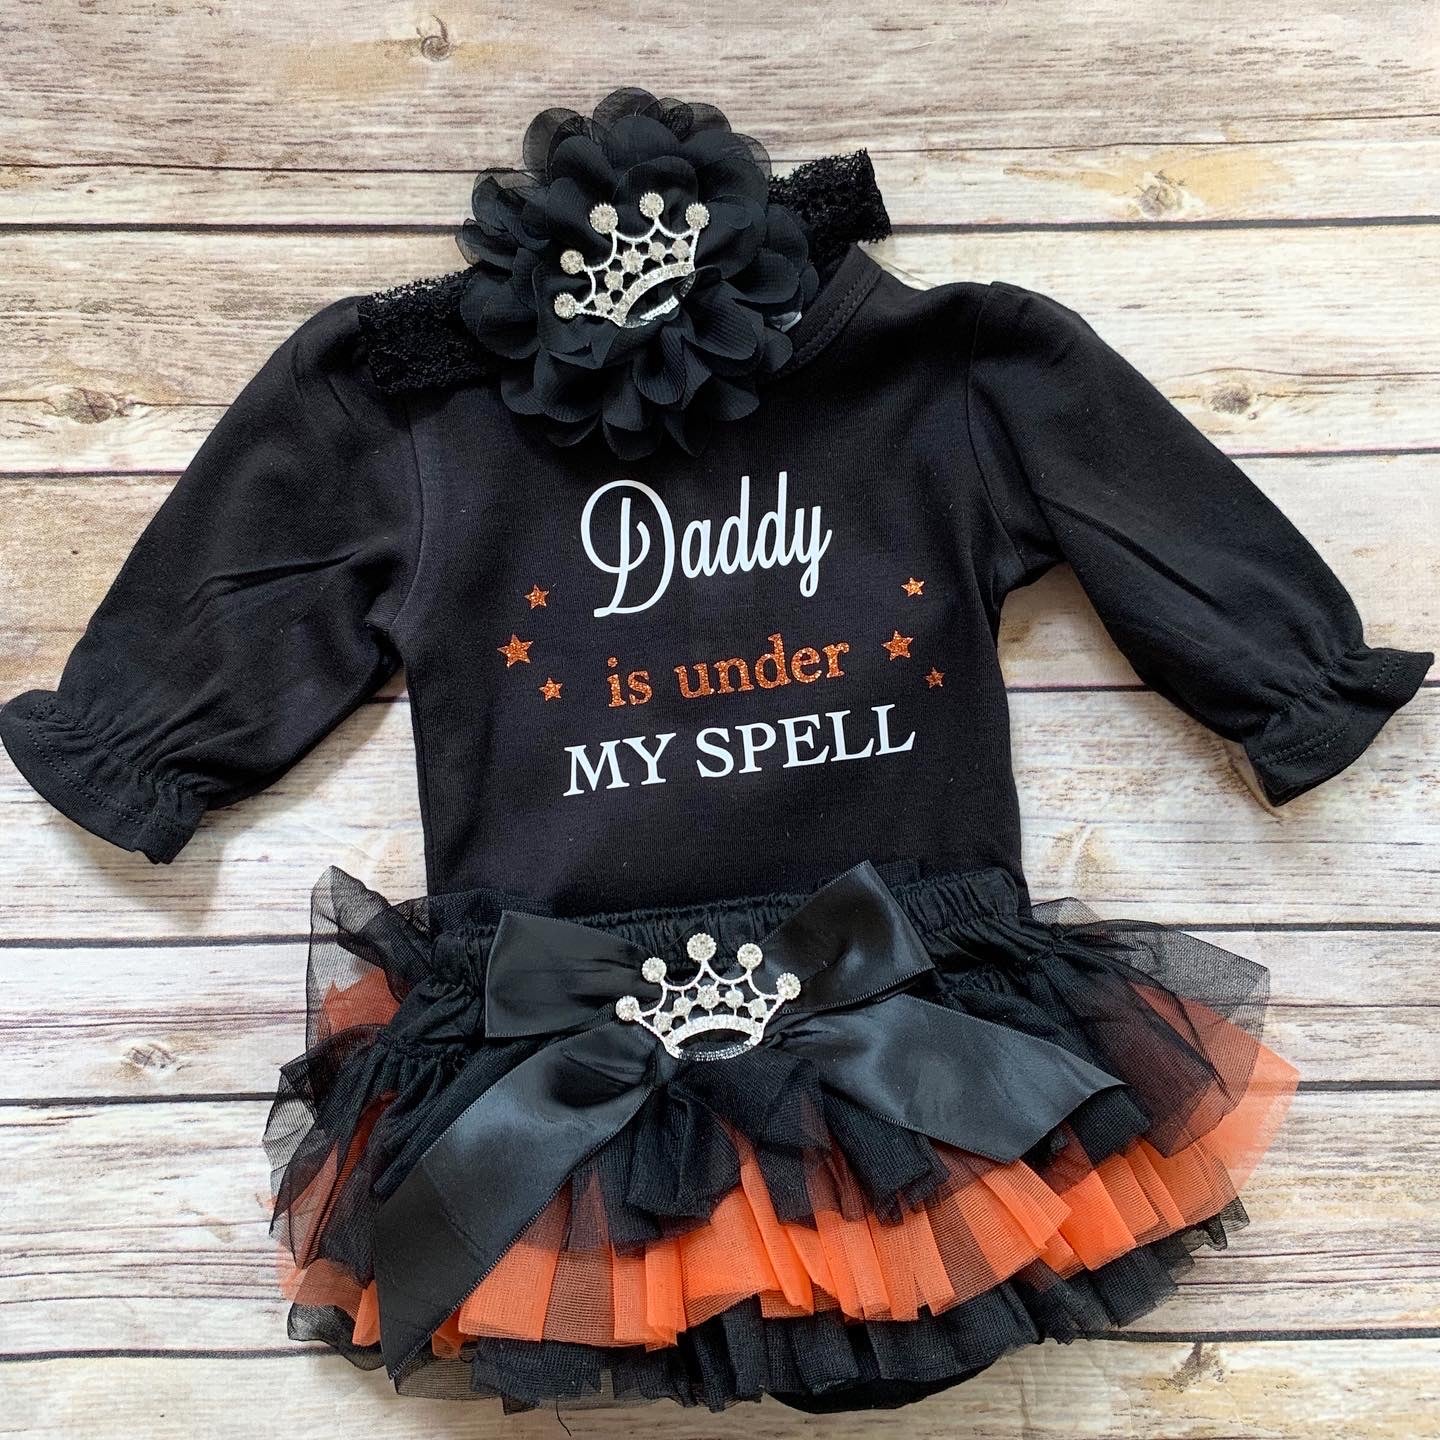 Daddy is under my spell